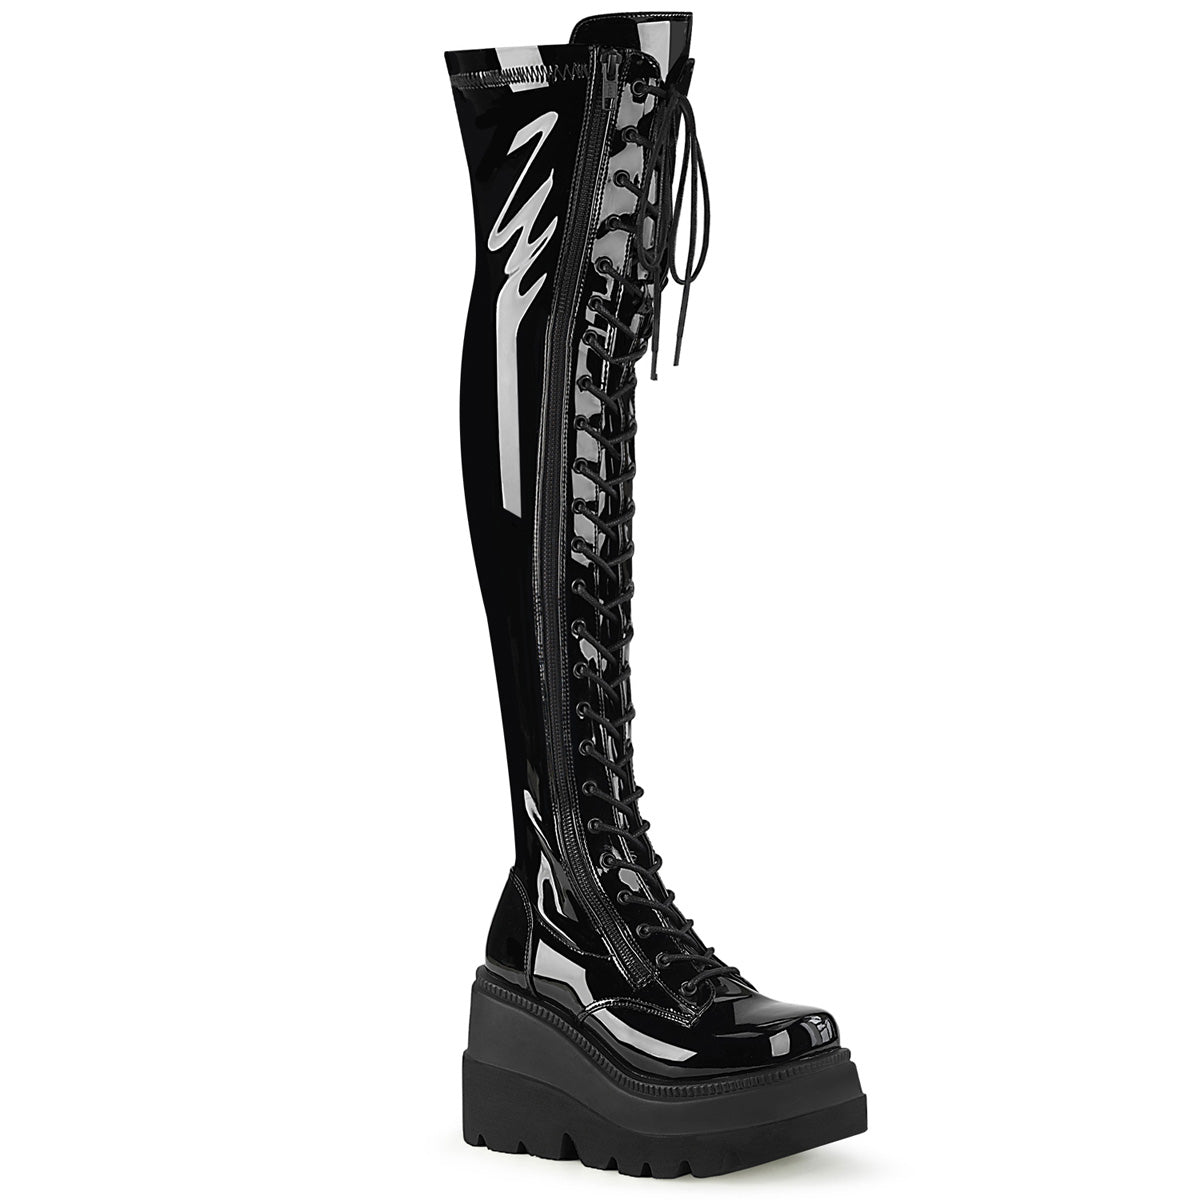 DemoniaCult SHAKER 374 Front Lace Boots,Platform Boots - From DemoniaCult Sold By Alternative Footwear